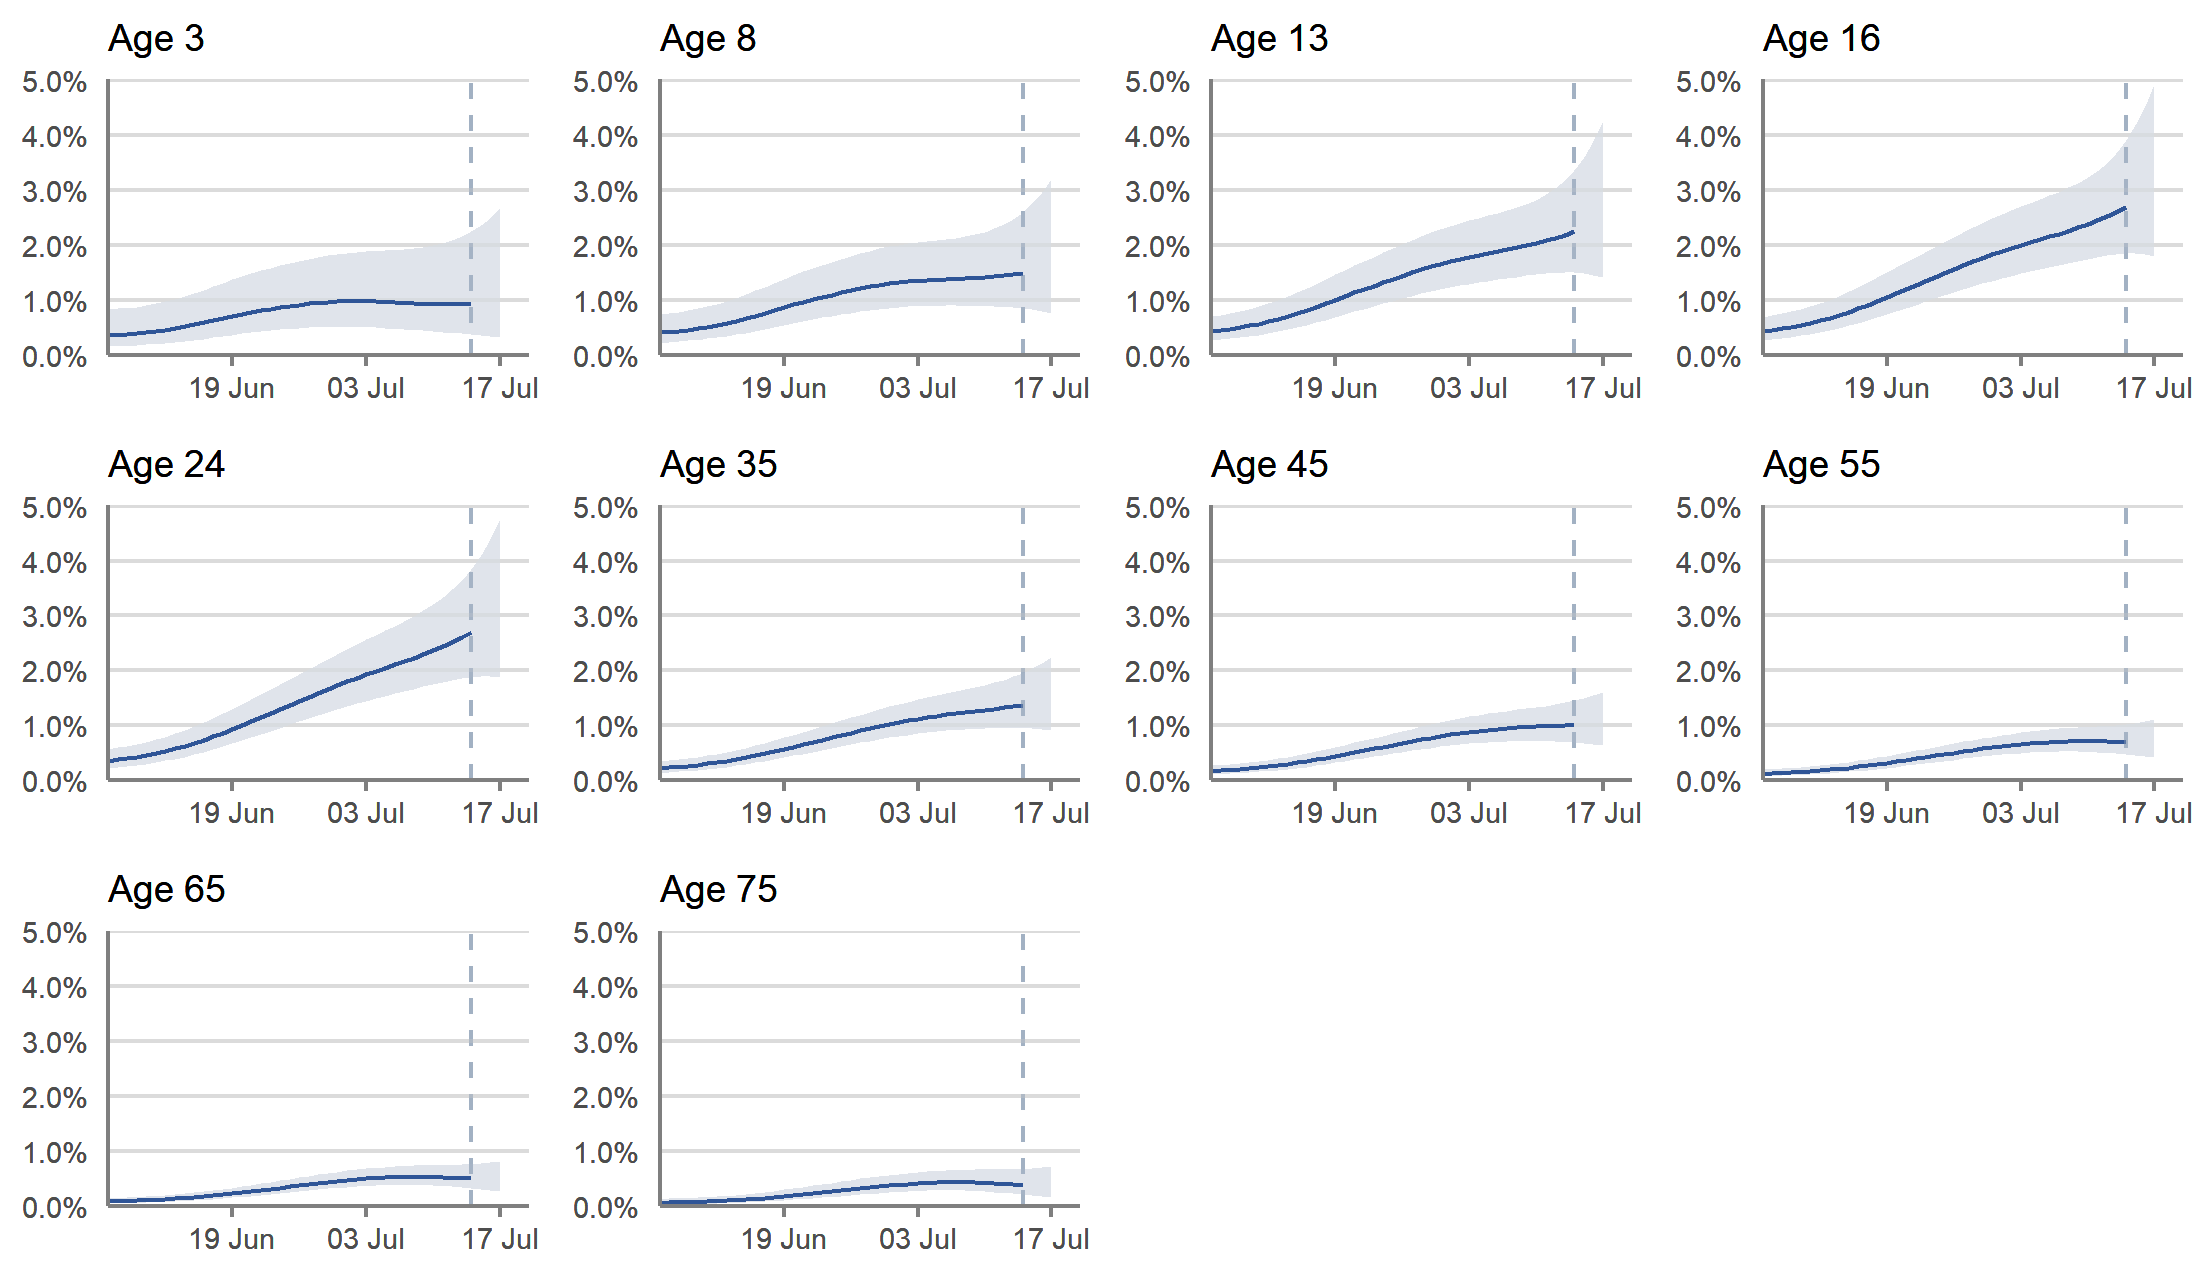 Figure 3: Modelled daily estimates of the percentage of the population in Scotland testing positive for COVID-19, by reference age, between 6 June and 17 July 2021, including 95% confidence intervals (see notes 2,5,6,8)